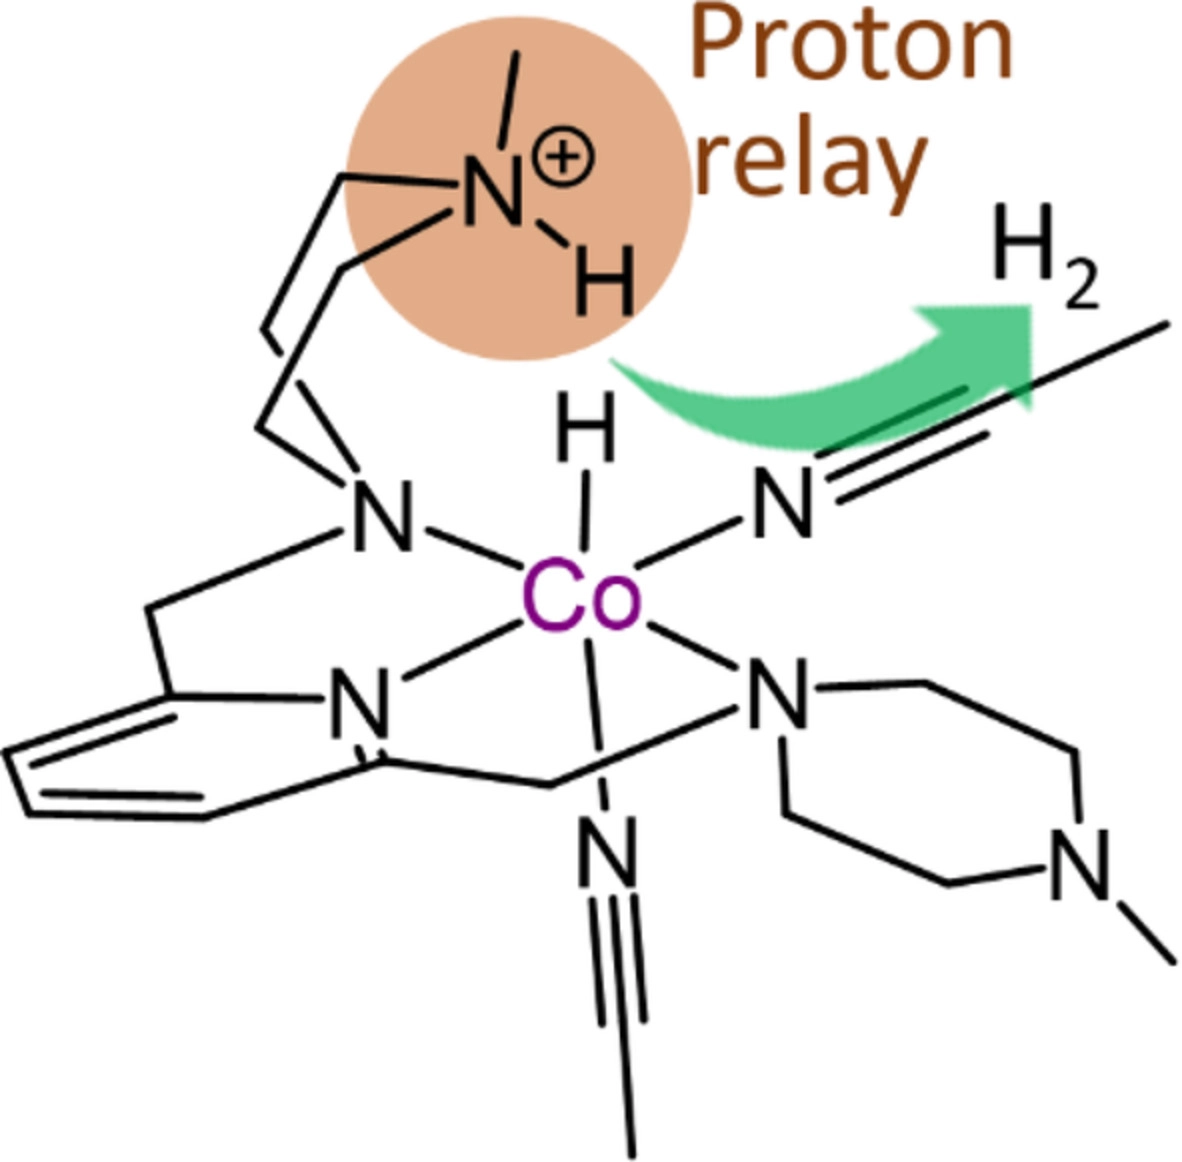 Effect of Lewis Basic Amine Site on Proton Reduction Activity of NNN-Co Pincer Complex